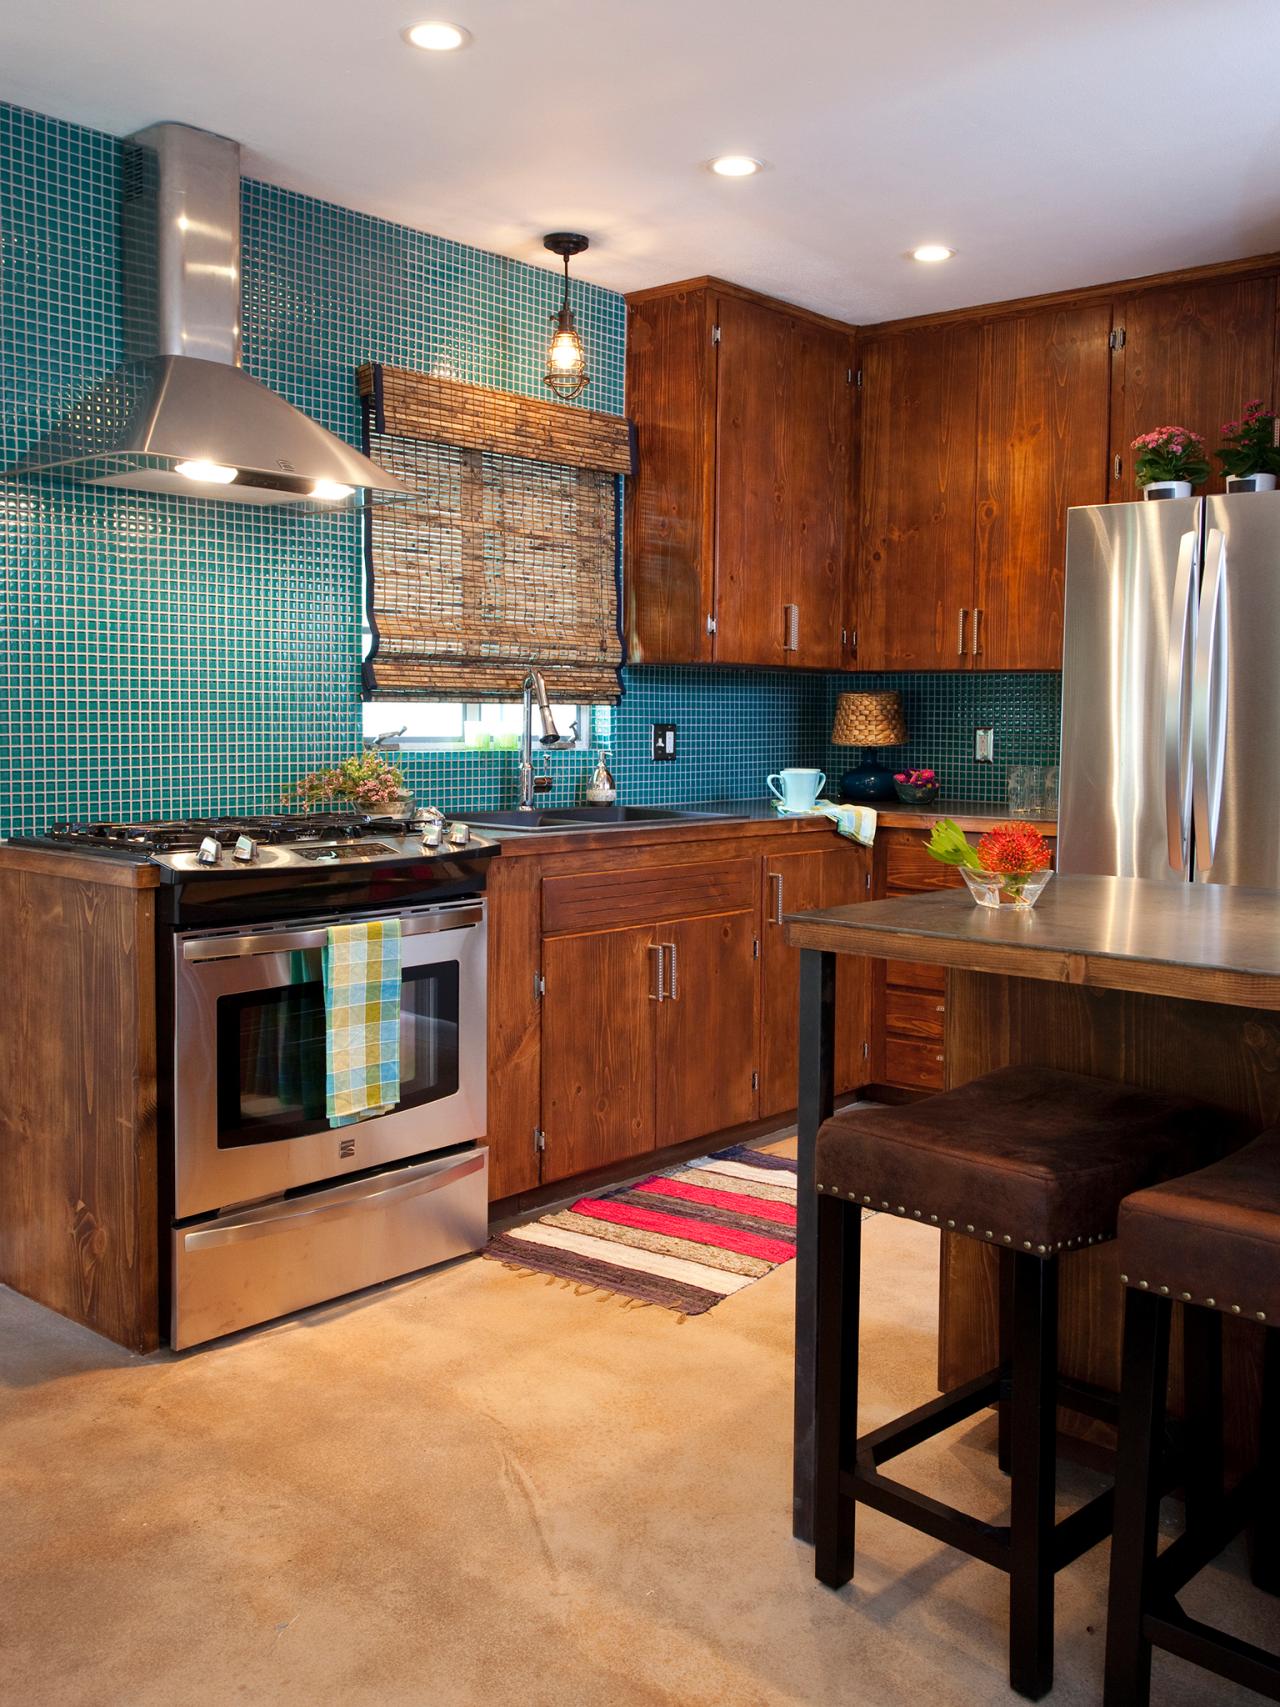 Modern Kitchen Paint Colors: Pictures & Ideas From HGTV | HGTV